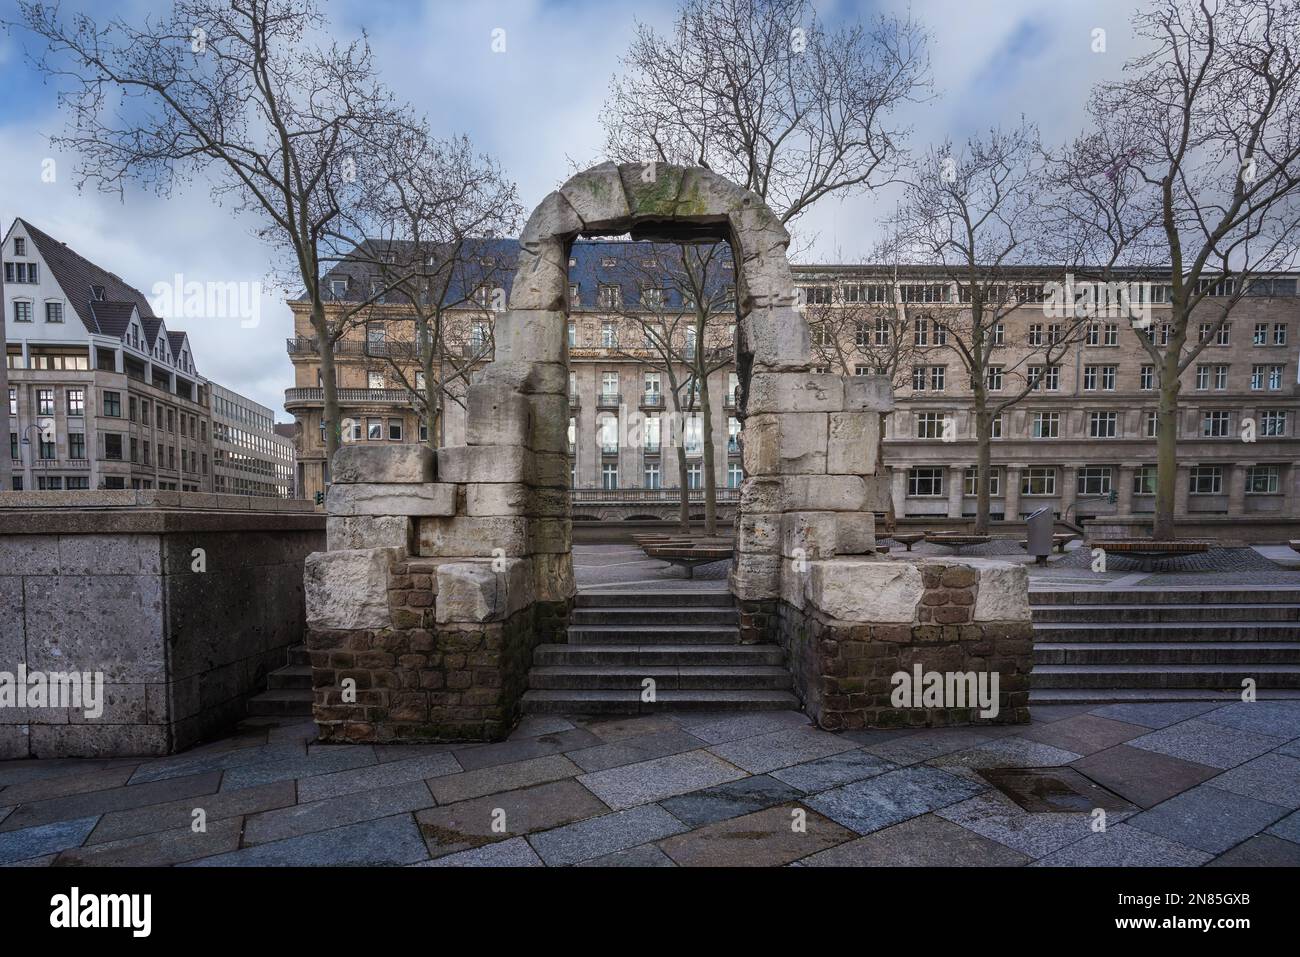 Cologne, Germany - Jan 28, 2020: Ruins of the Side Portal of the Roman North Gate - Cologne, Germany Stock Photo